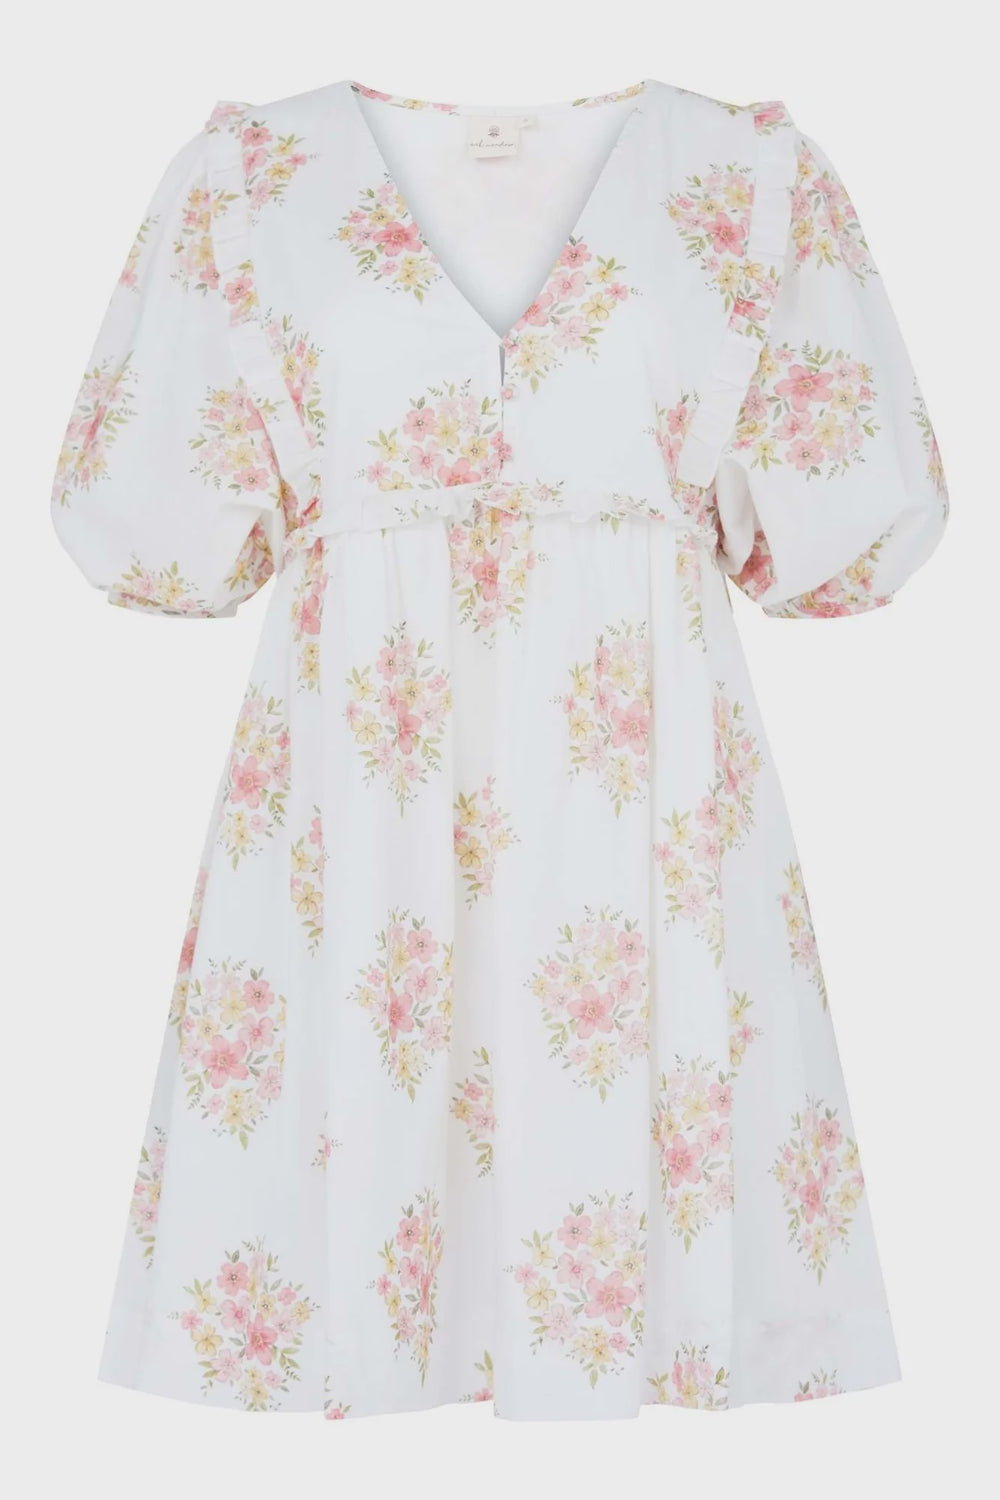 Iggy Dress in Spring Floral